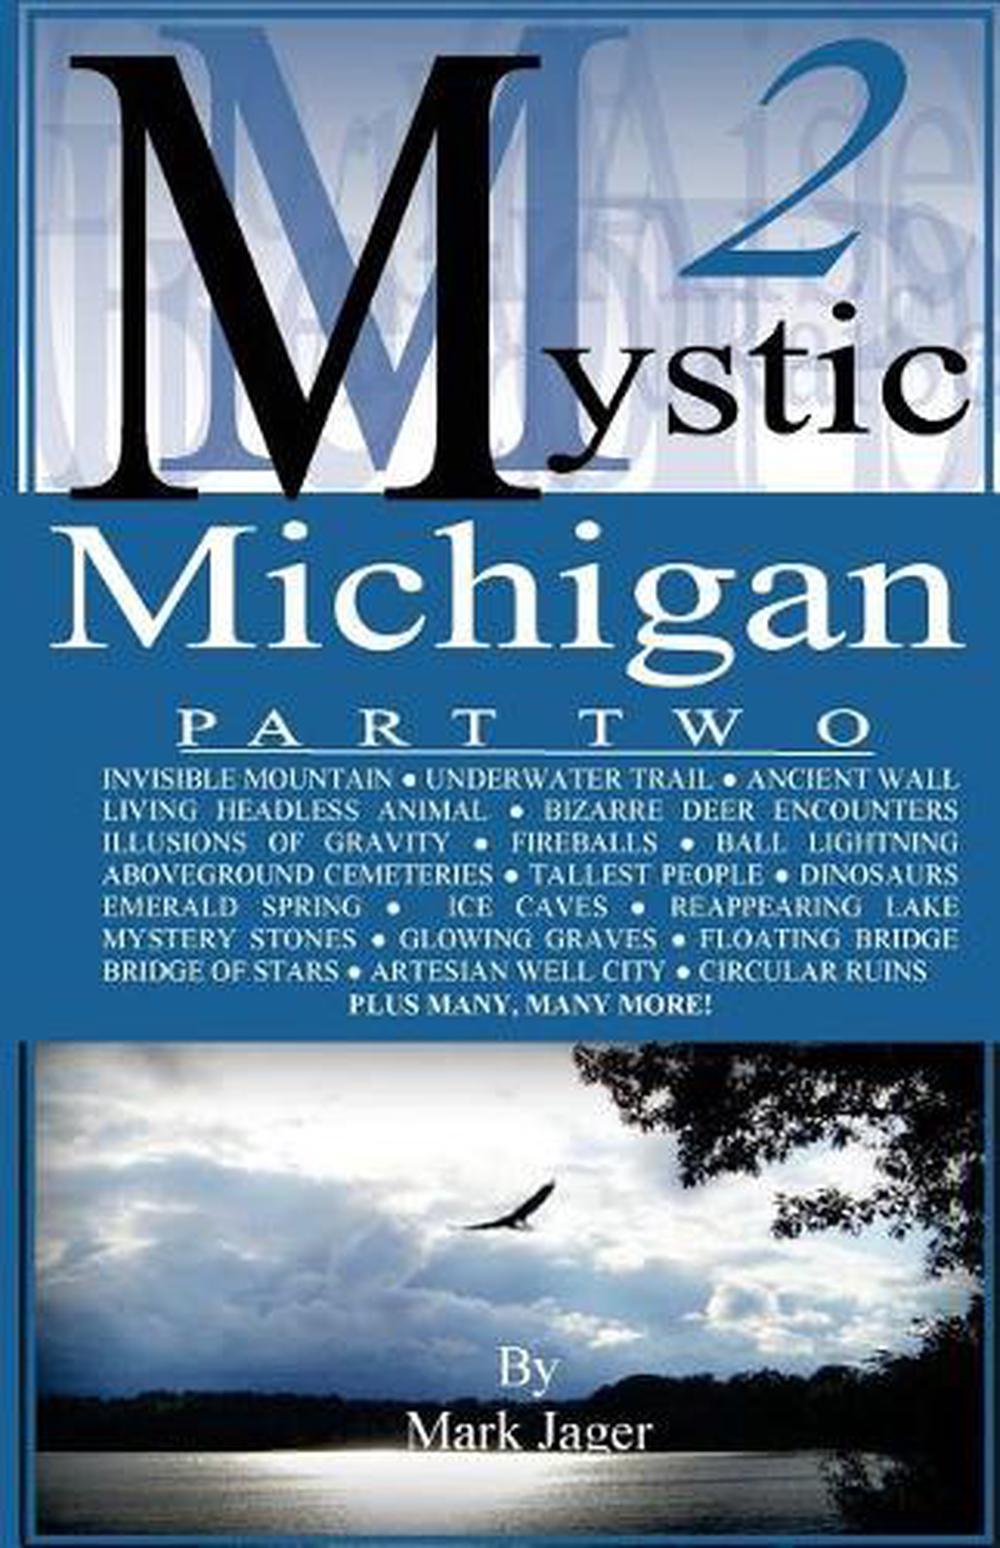 Mystic Michigan Part 2 by Mark Jager (English) Paperback Book Free Shipping! - Afbeelding 1 van 1